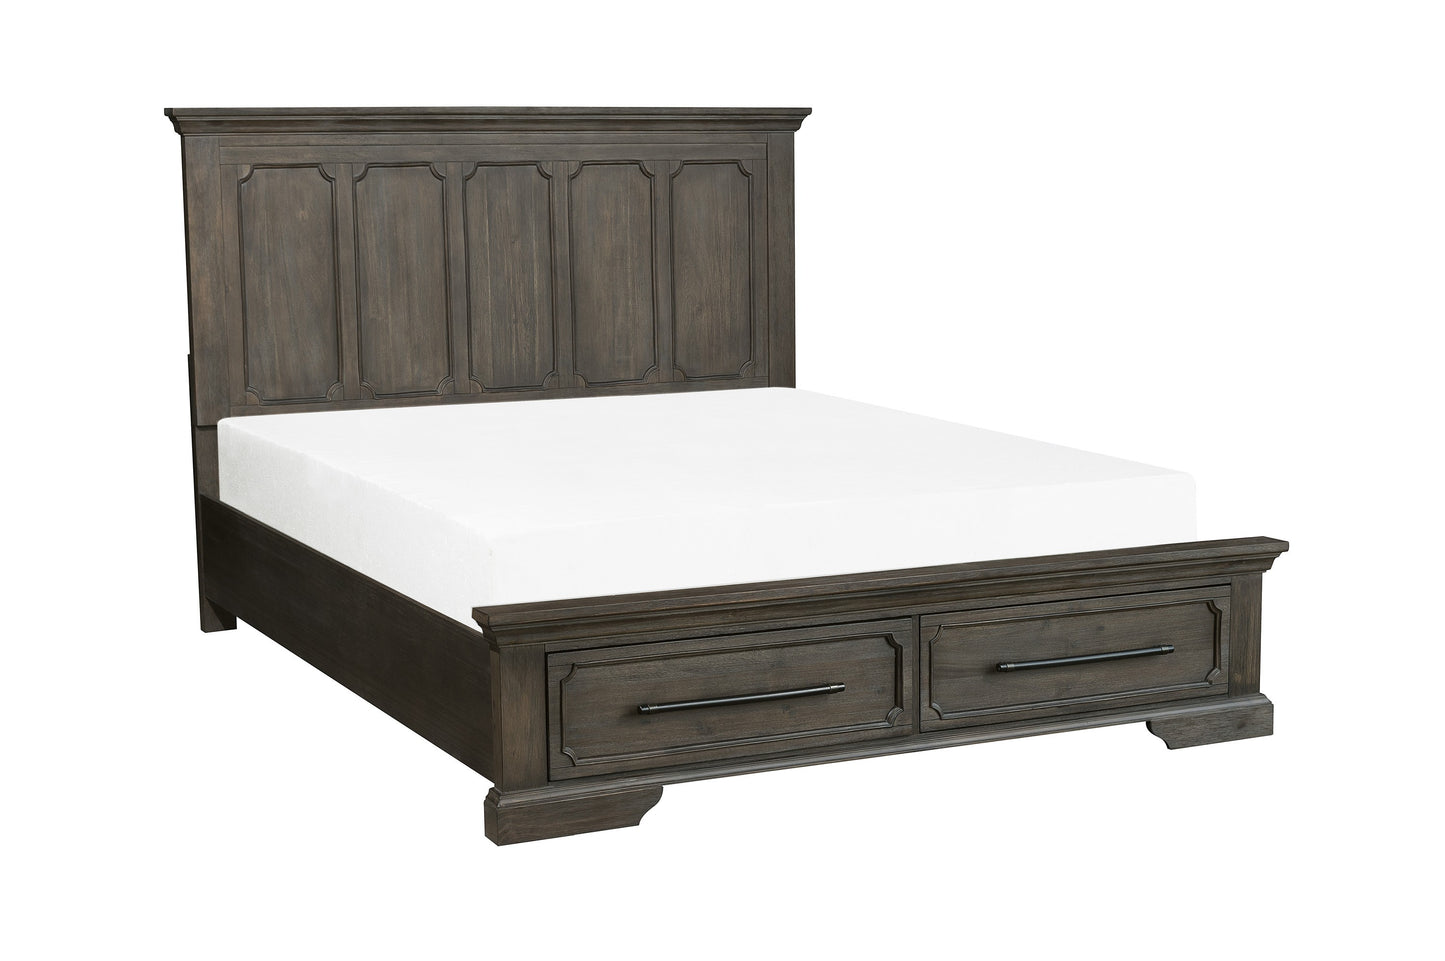 Homelegance Toulon 5PC Bedroom Set Cal King Platform Bed with Footboard Storages Dresser Mirror One Nightstand Chest in Distressed Oak